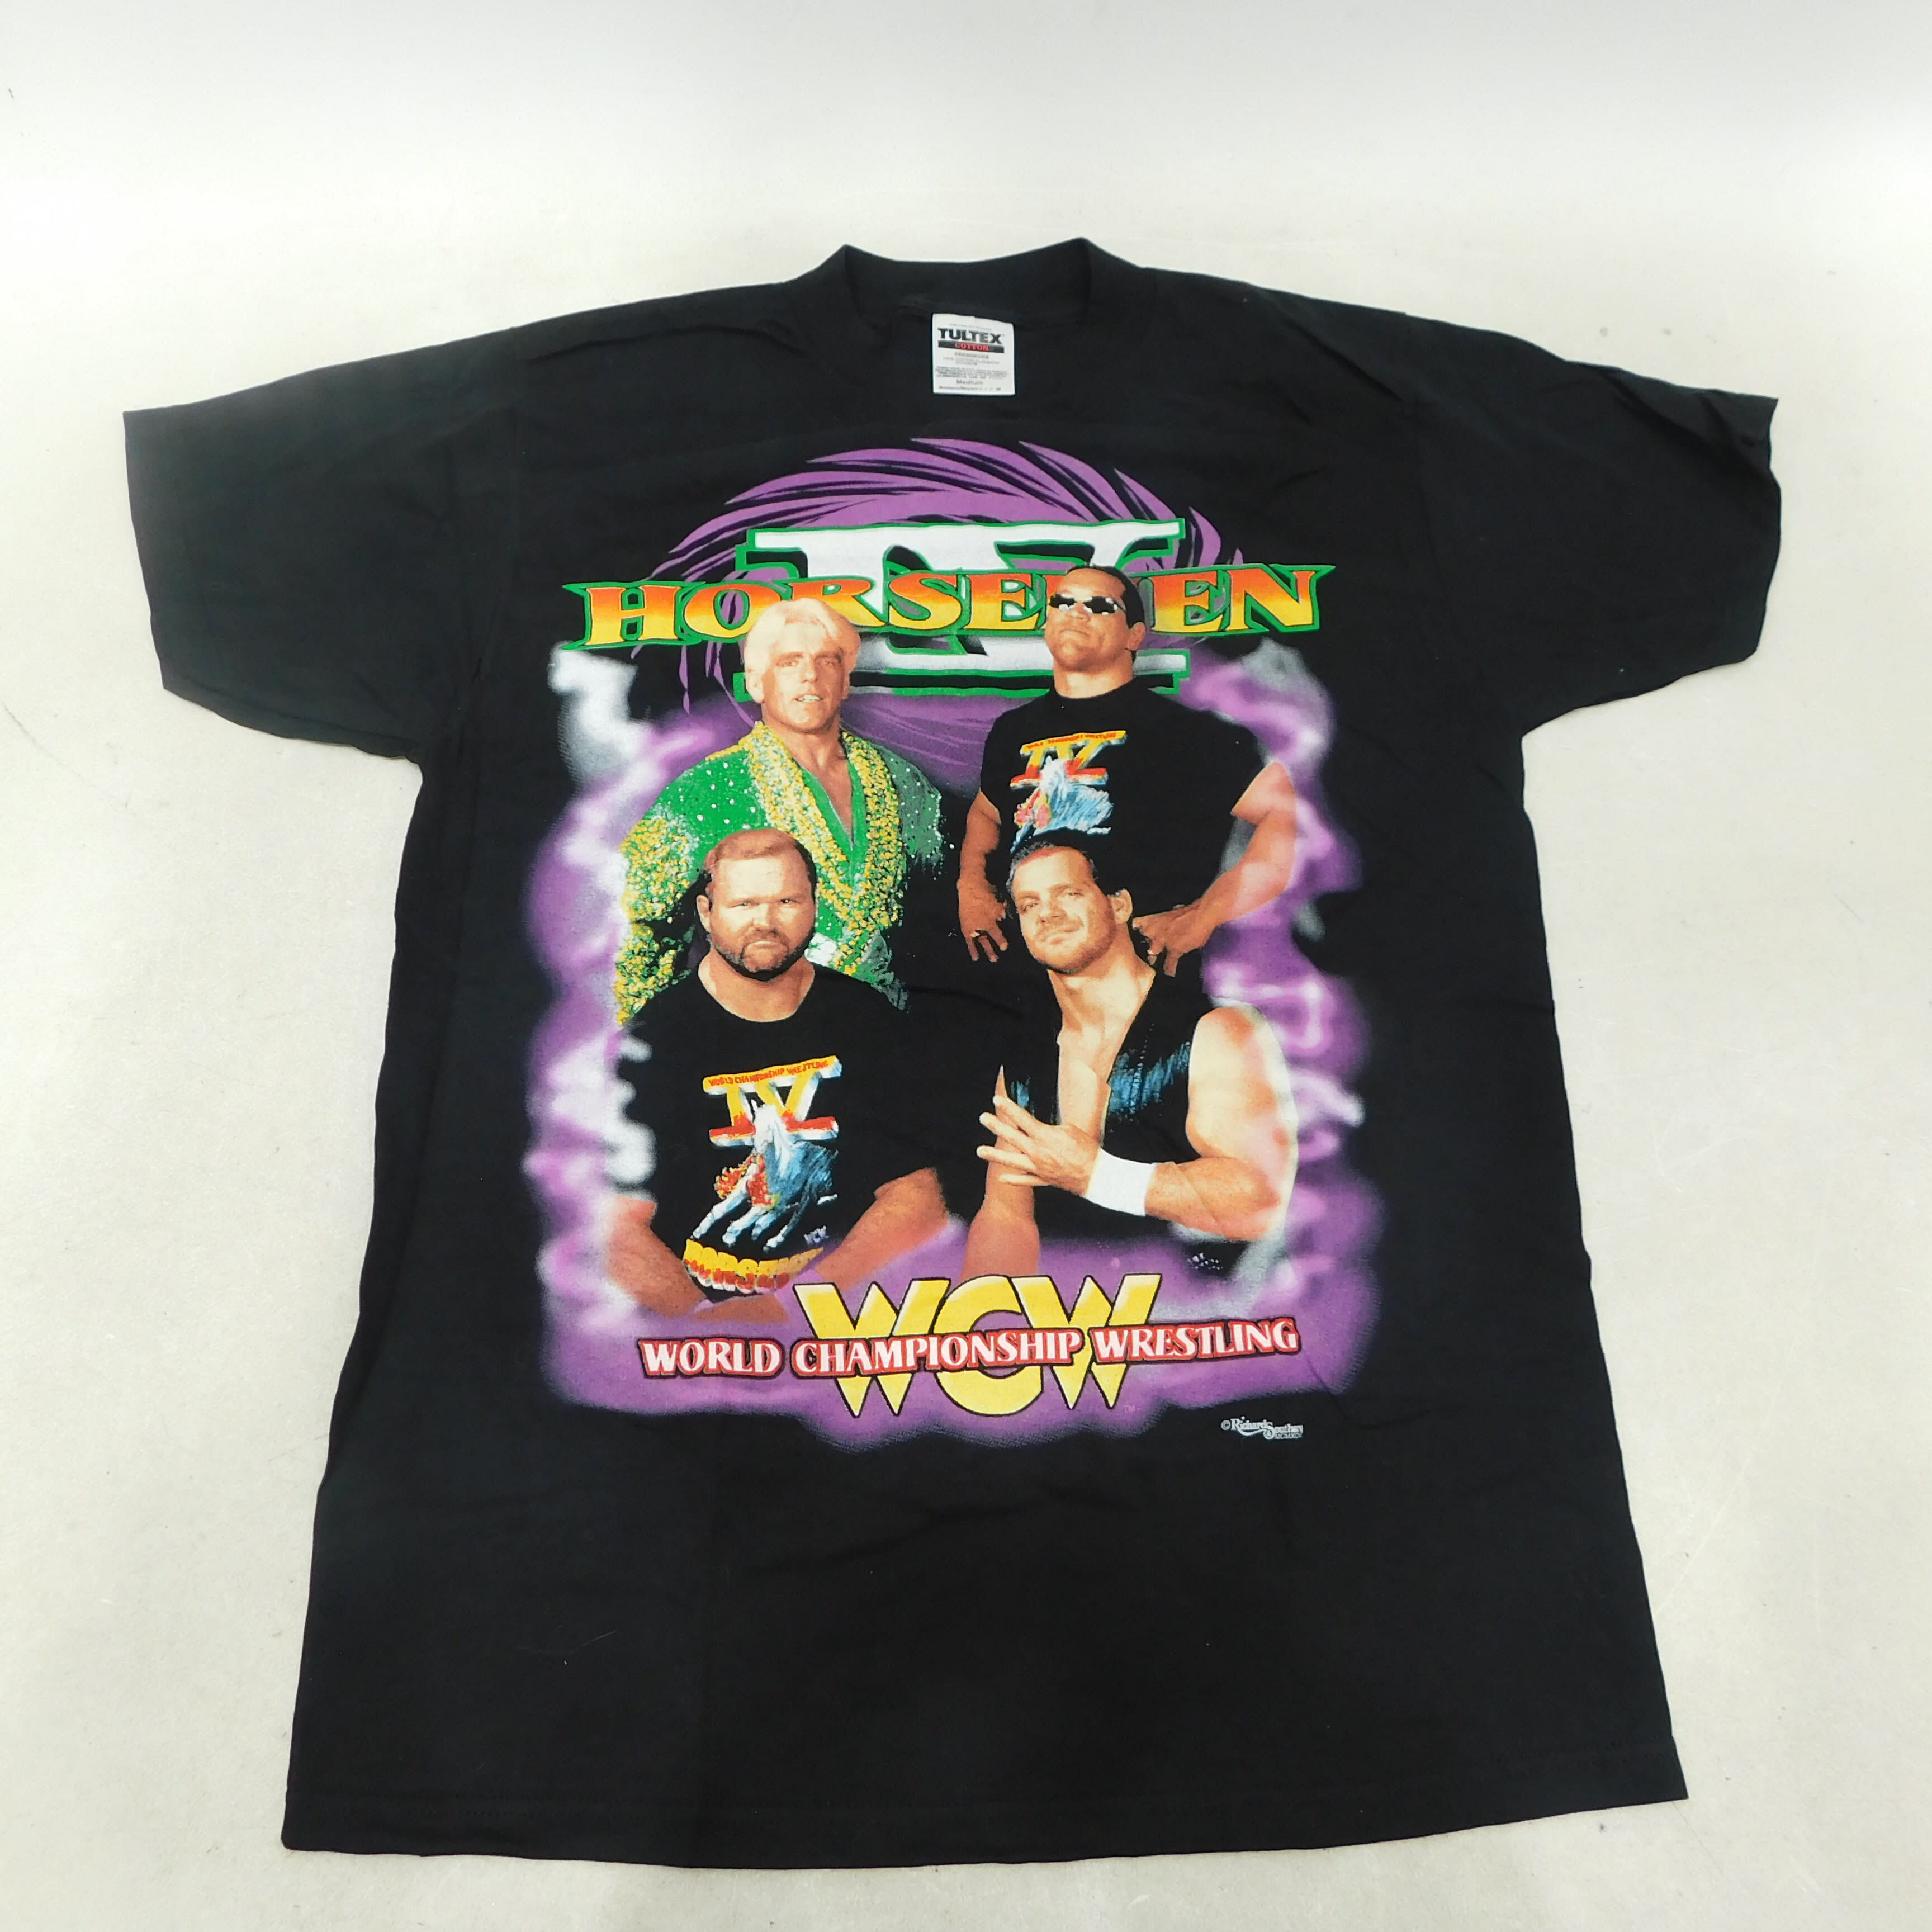 Twenty years ago , WWE purchased WCW. Questions remain about where WCW's  rings, ring accessories and sets wound up. One of the ring aprons wound up  on the island of Trinidad and